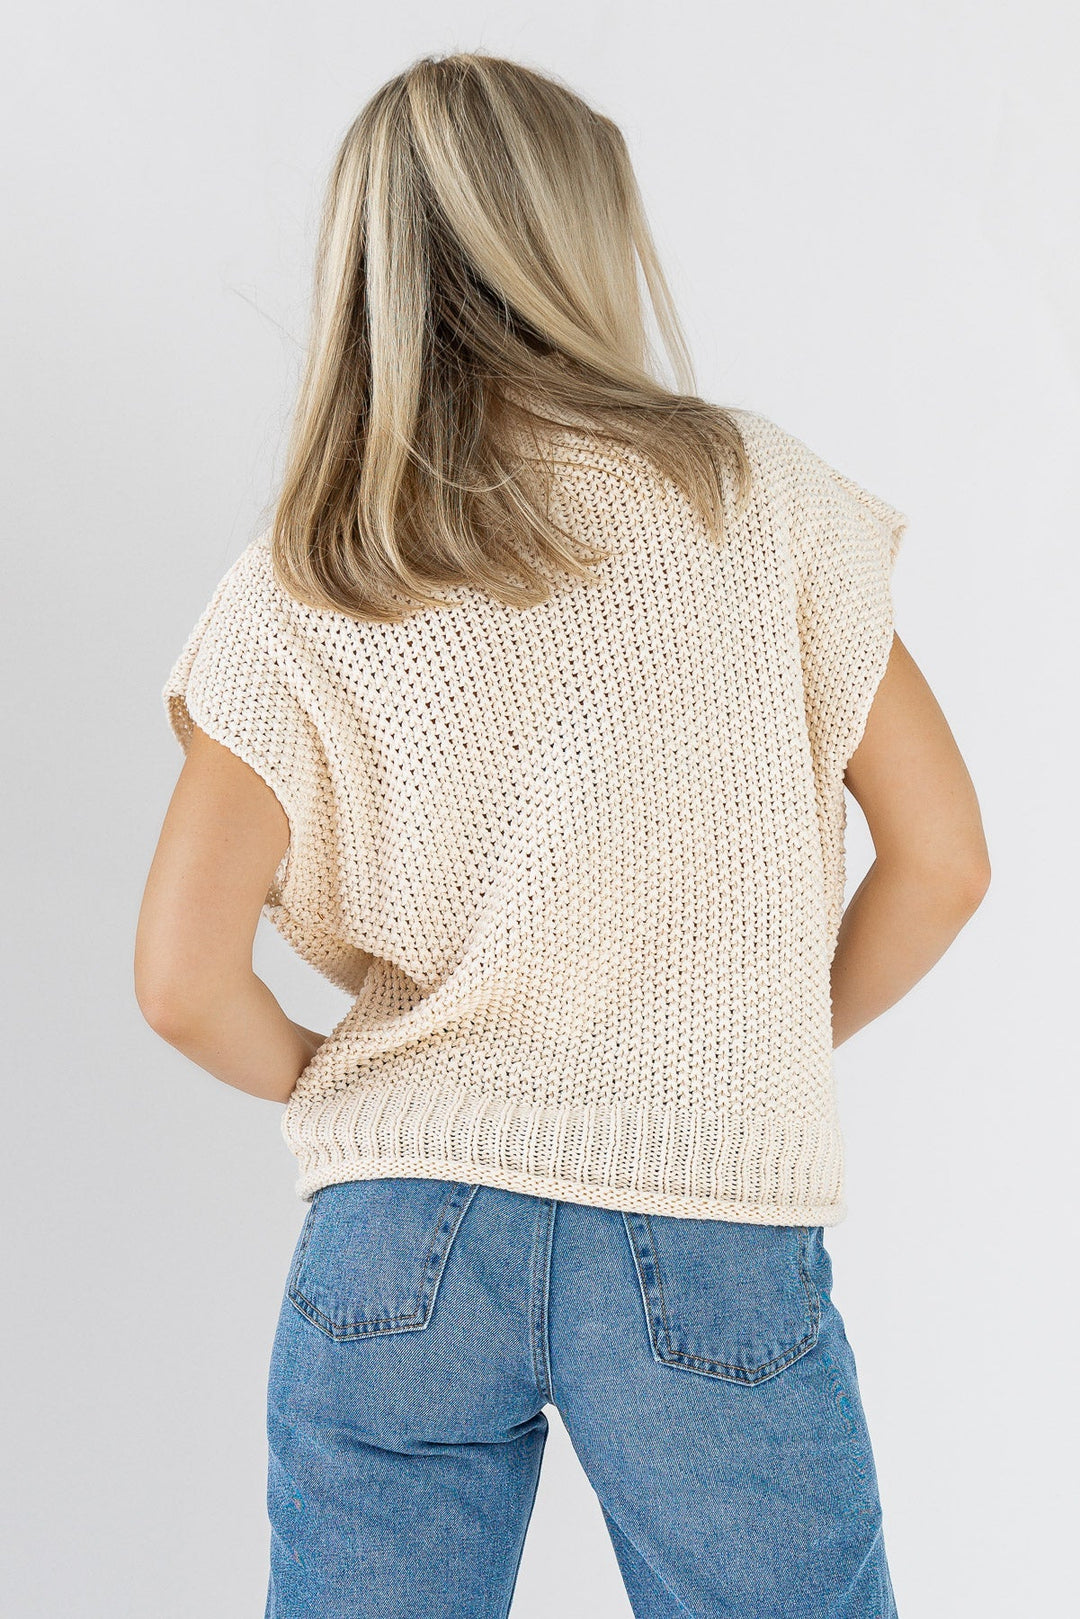 Falling For You Sweater Vest - Cream - JO+CO